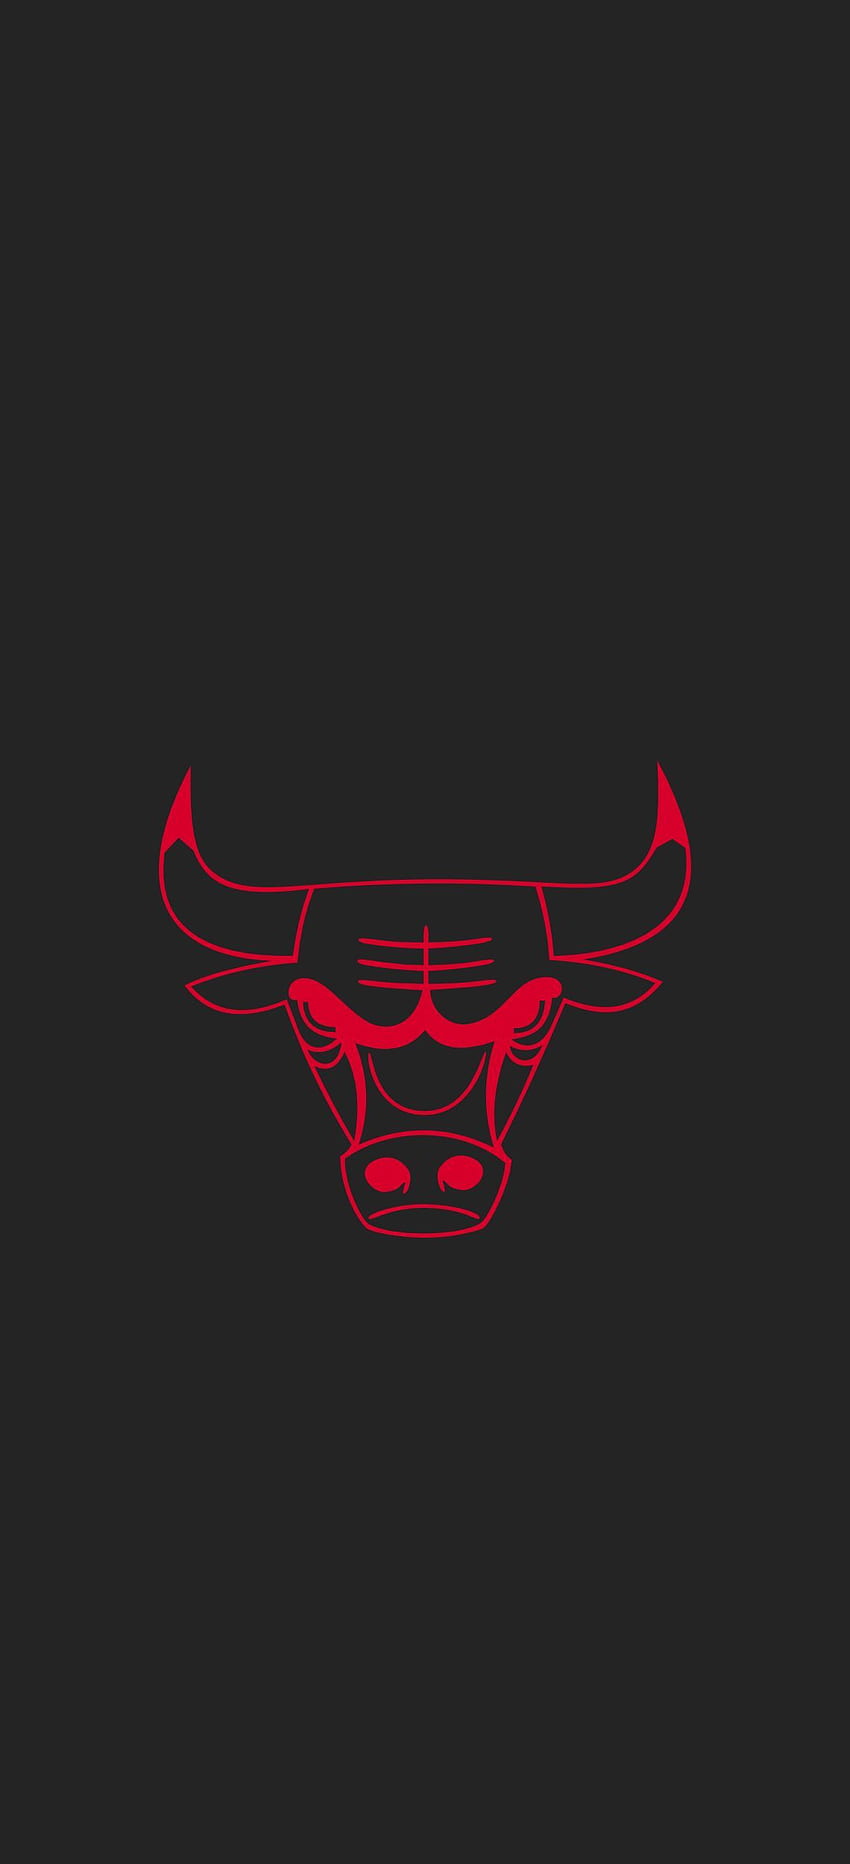 60 Chicago Bulls HD Wallpapers and Backgrounds